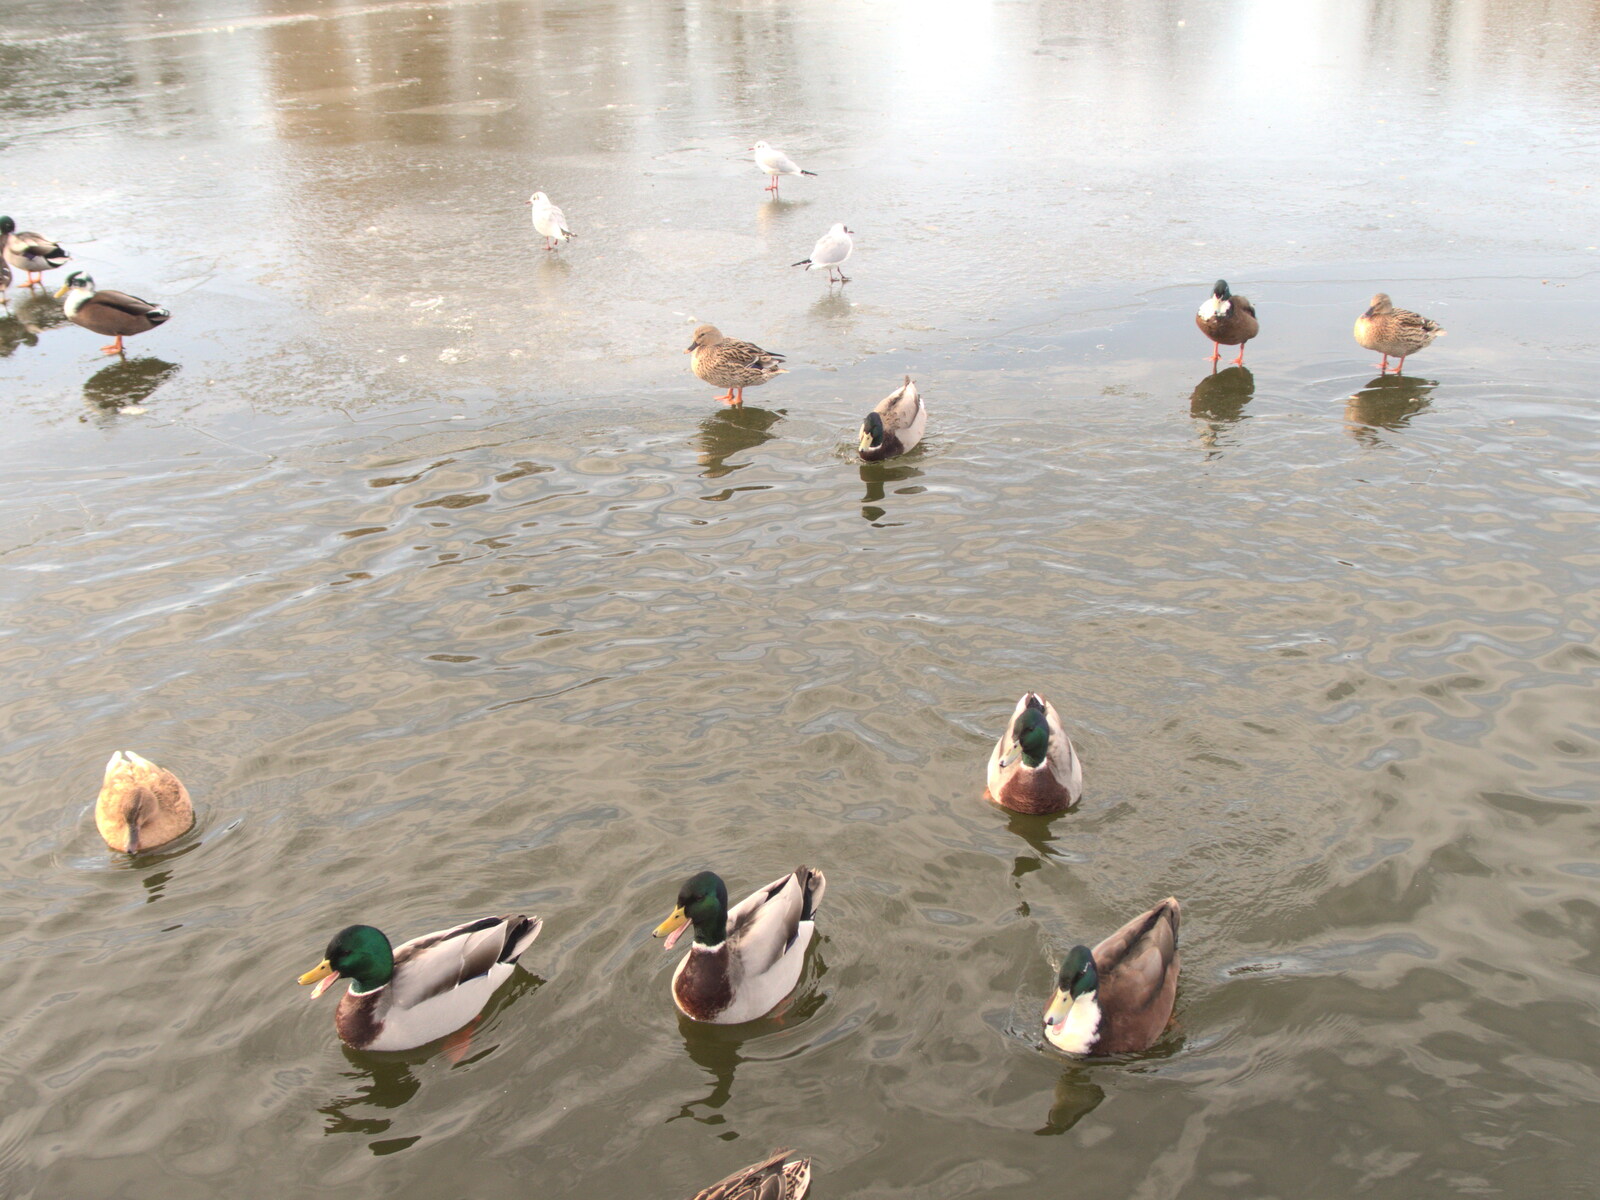 Some ducks stand about on the ice from Derelict Infants School and Ice Sculptures, Diss and Palgrave, Norfolk and Suffolk - 13th February 2021